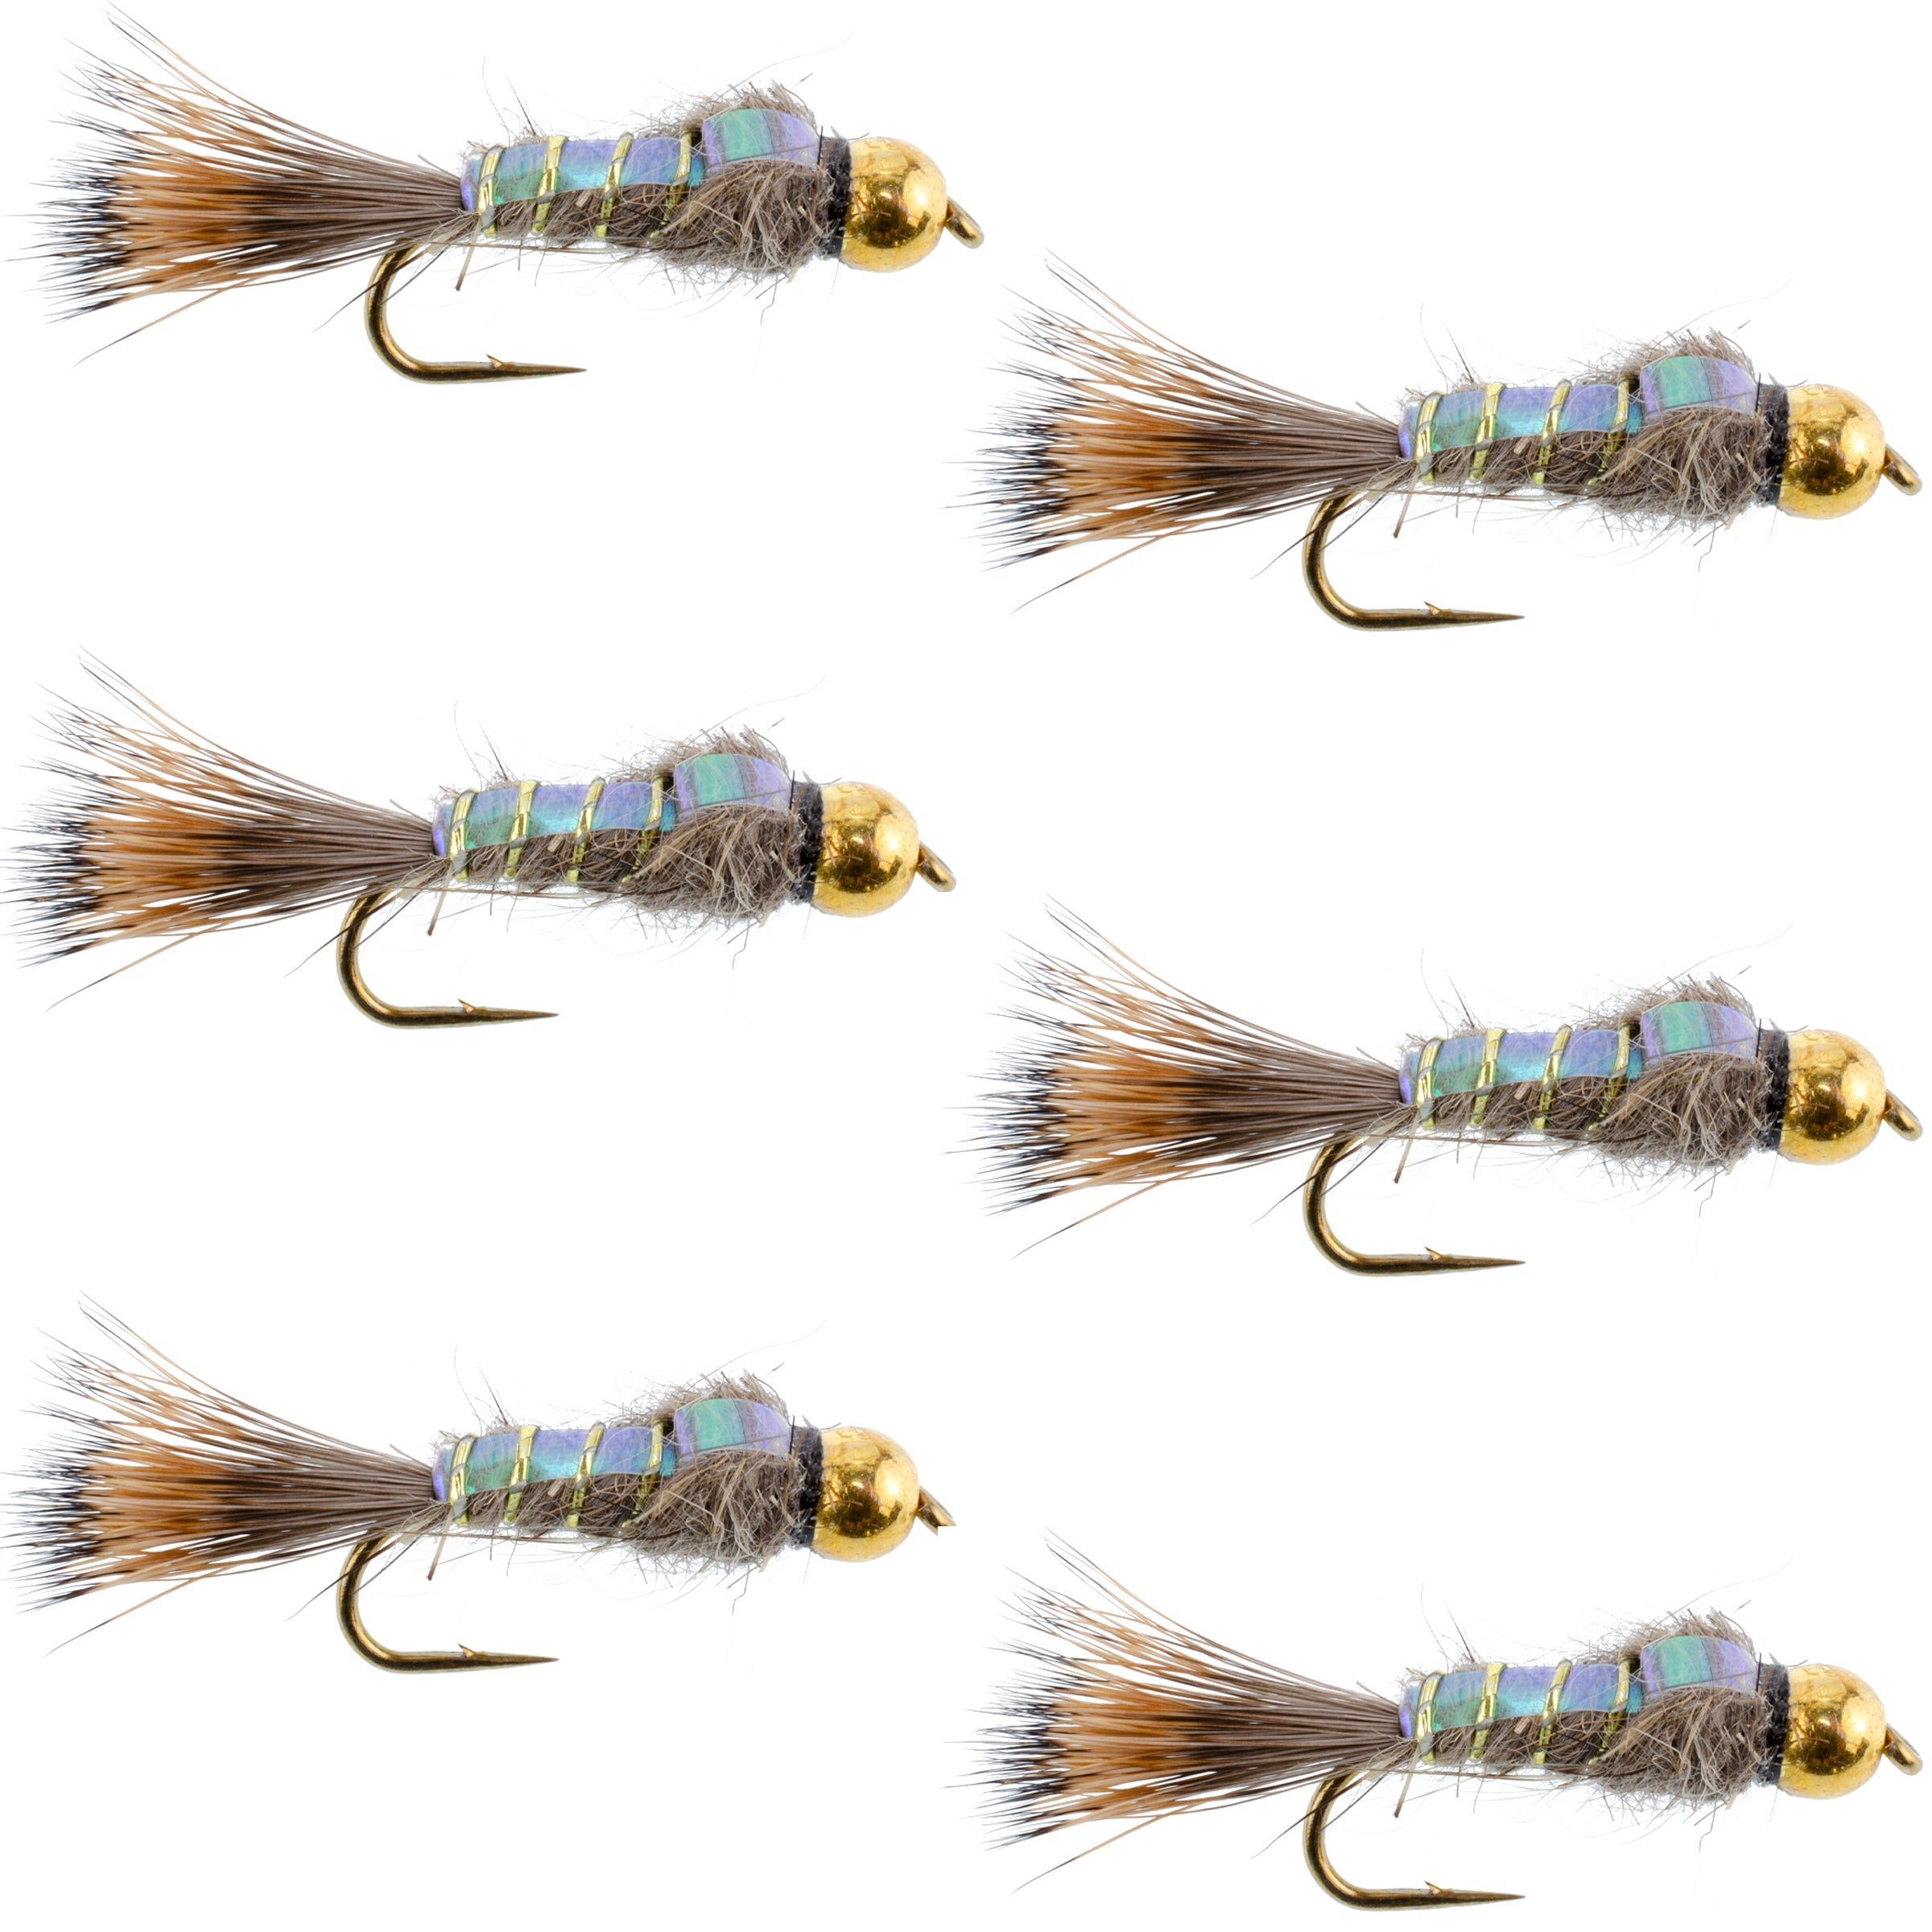 Bead Head Nymph Fly Fishing Flies - Flashback Gold Ribbed Hare's Ear Trout Fly - Nymph Wet Fly - 6 Flies Hook Size 14